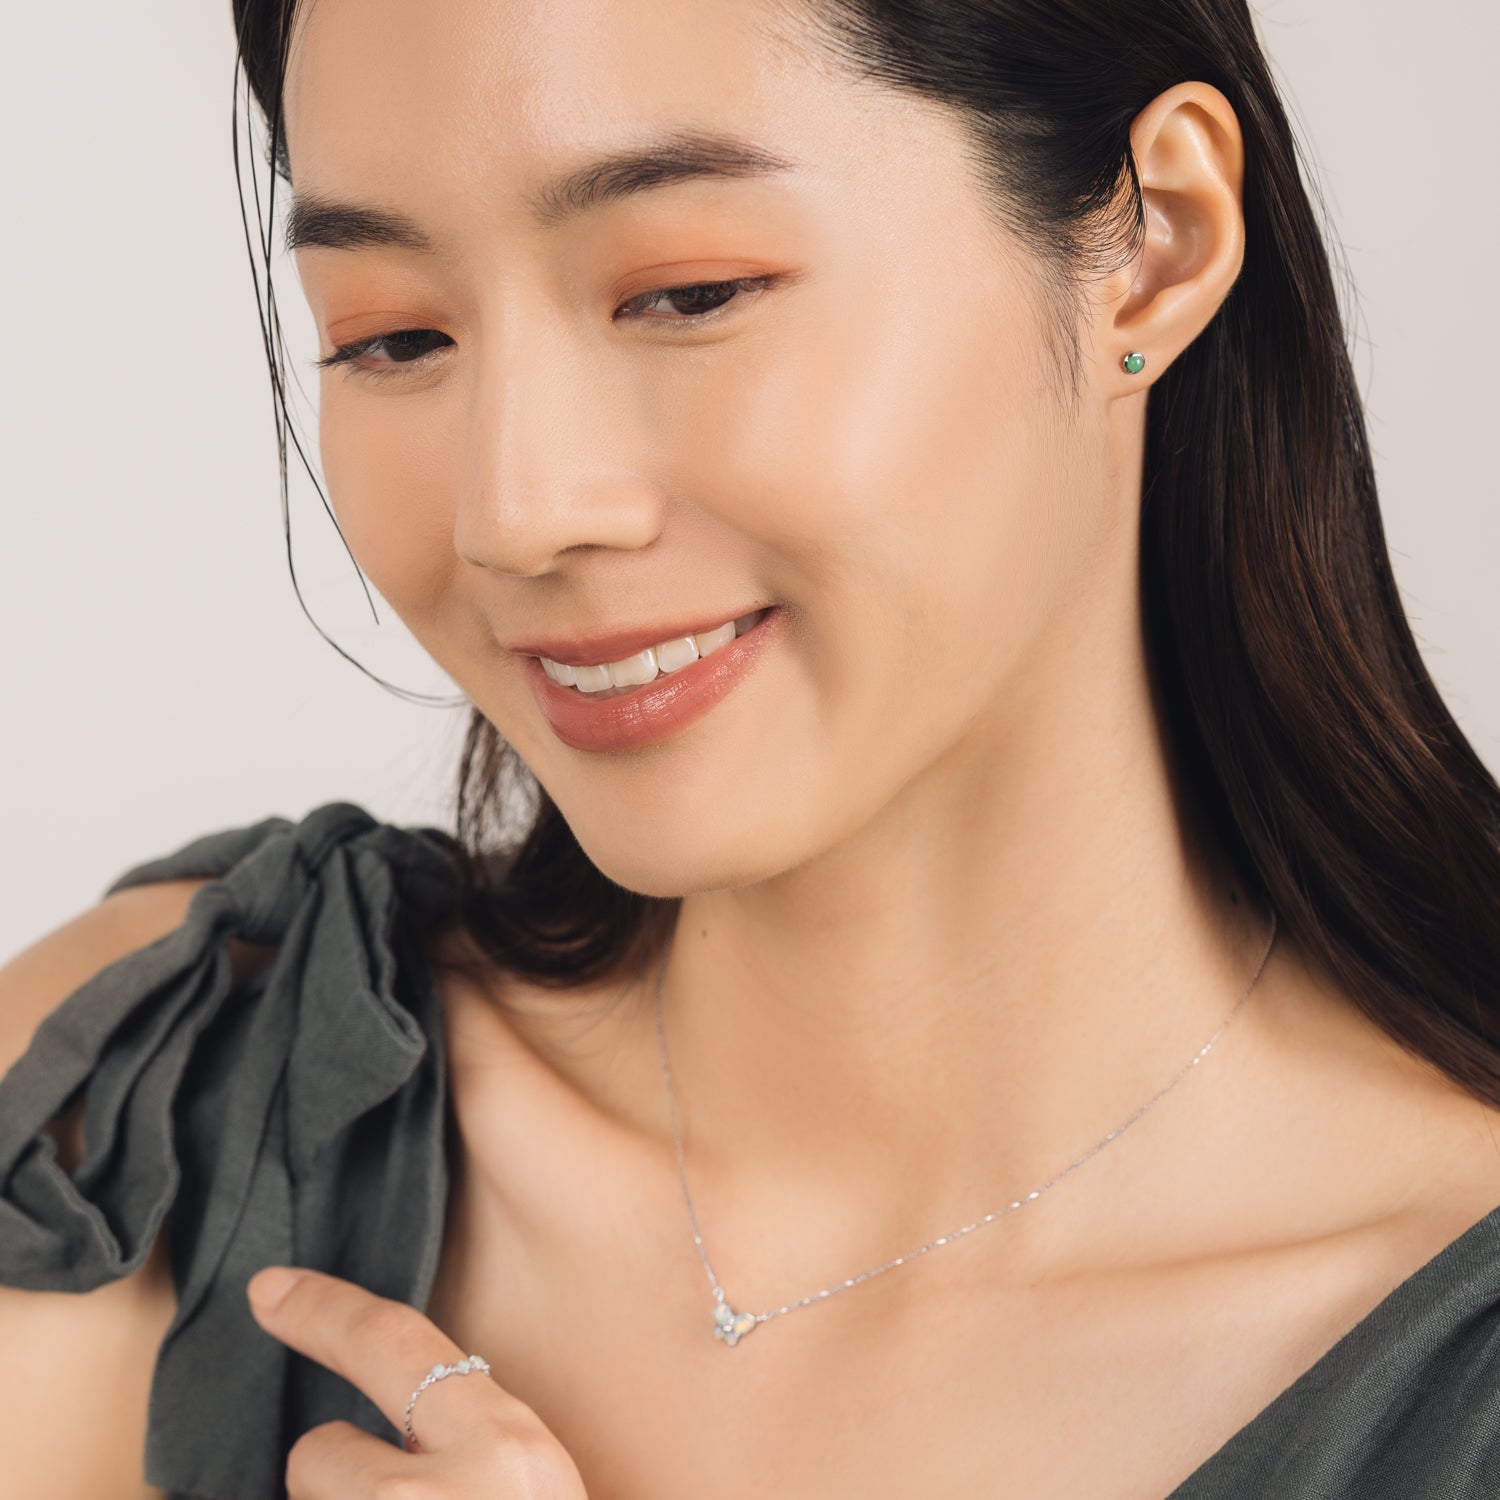 Fine and dainty studs. Model is wearing solid white gold earrings set with chrysoprase gemstones